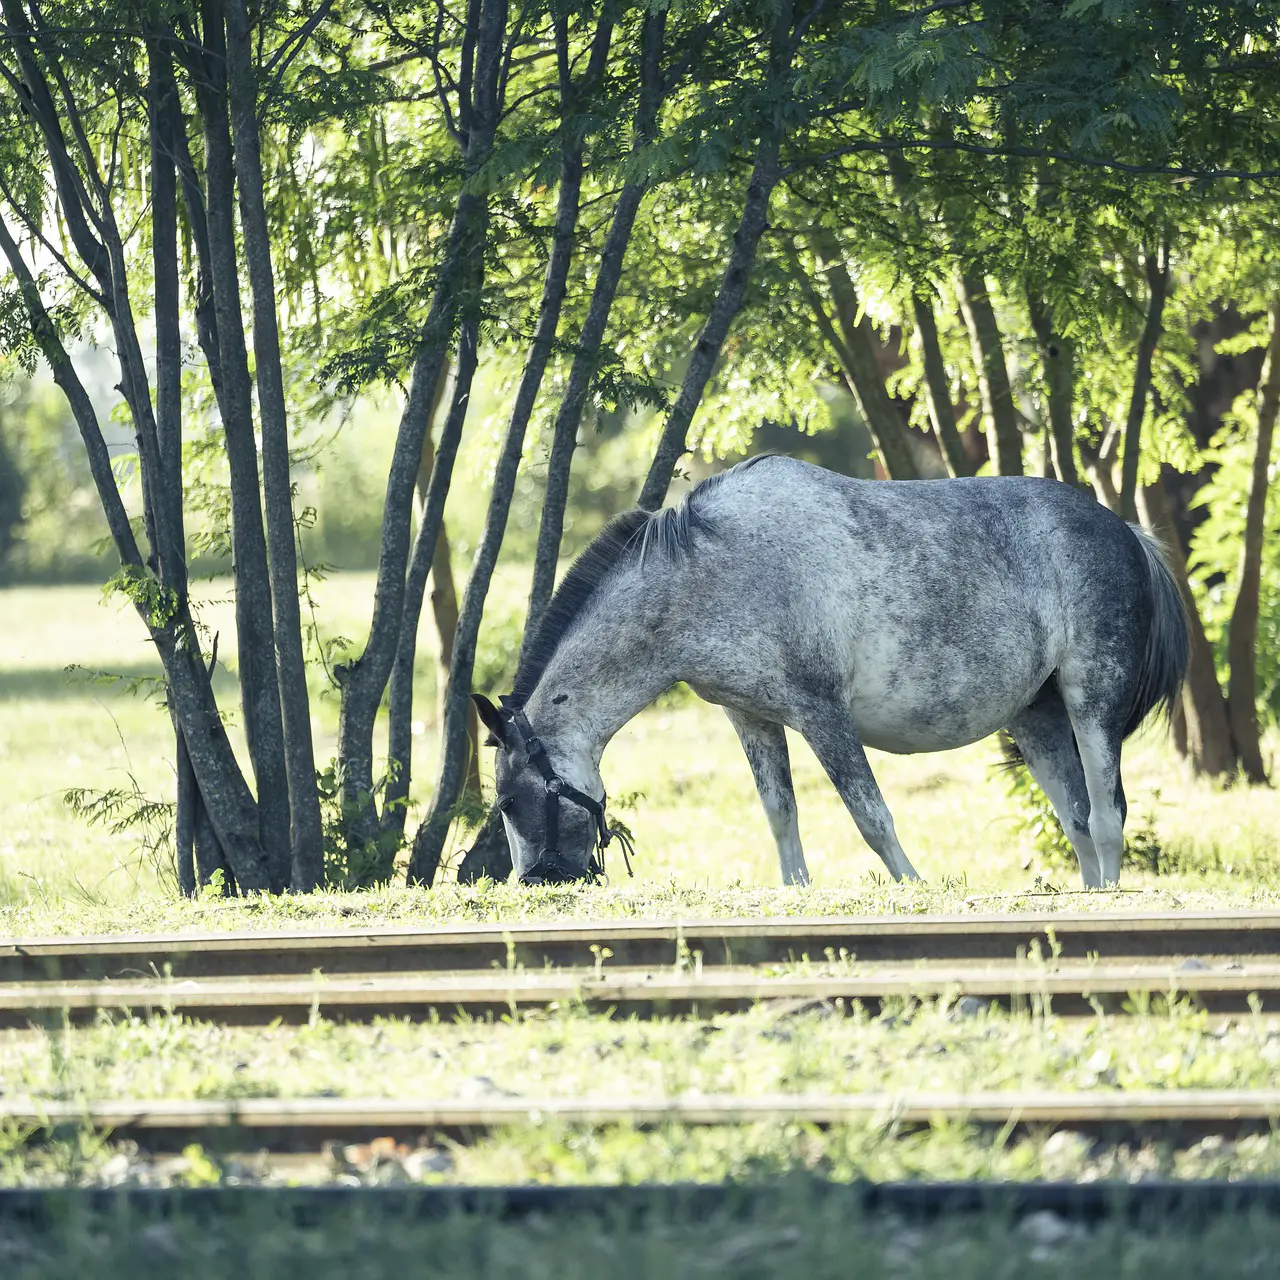 Clenbuterol Use in Horses